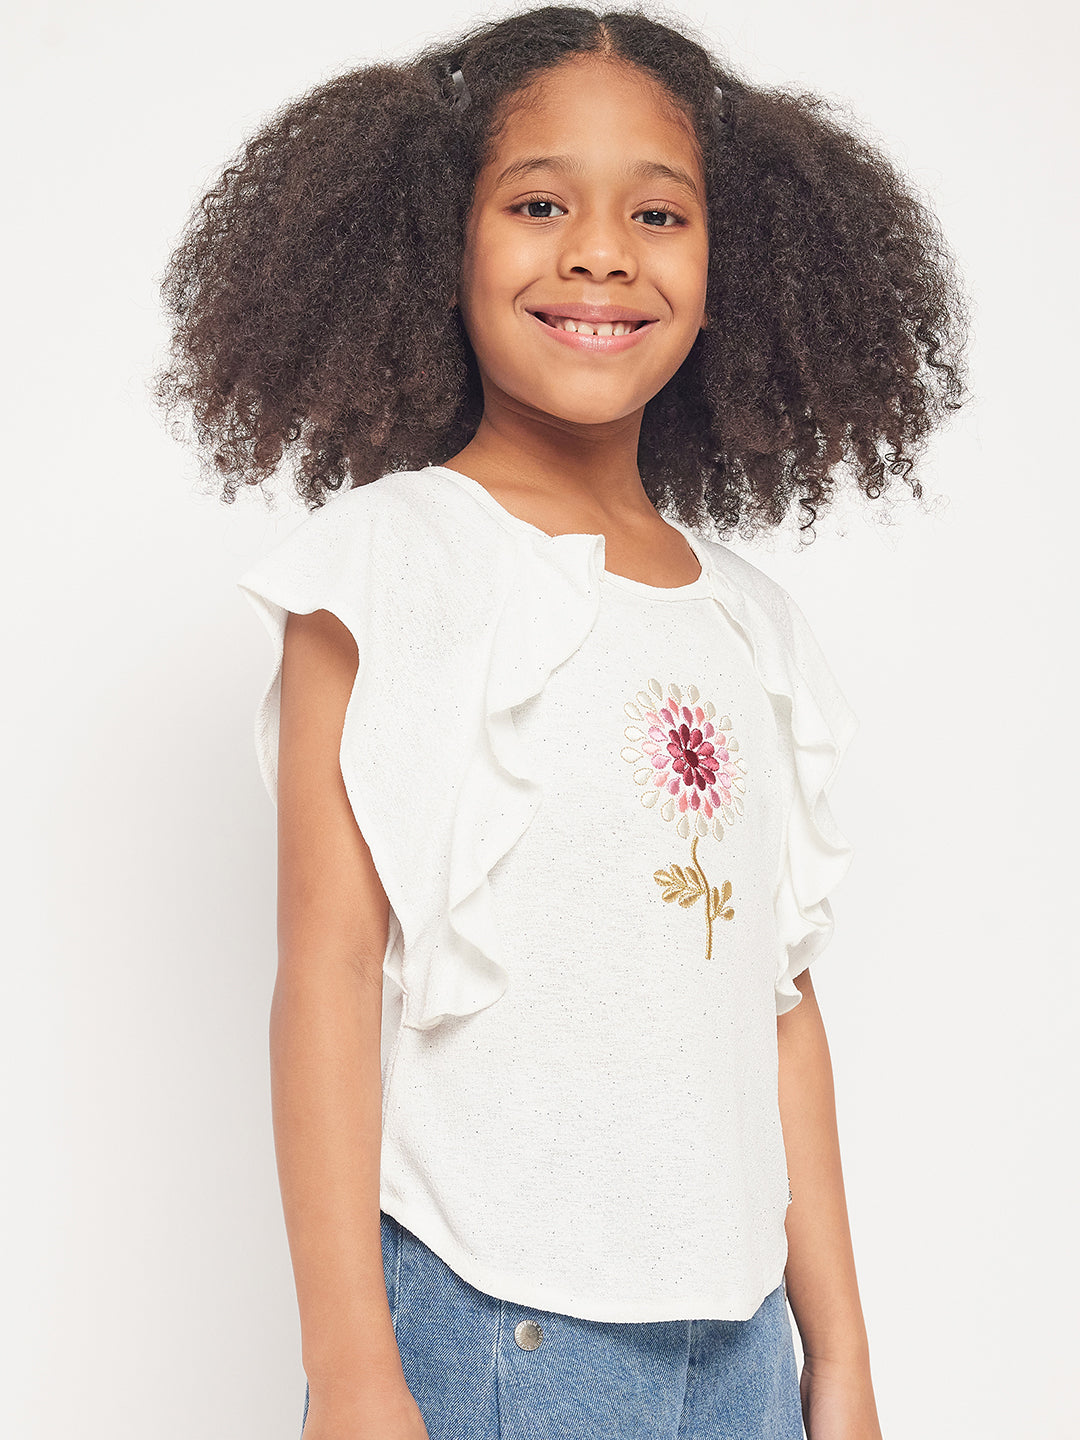 Pampolina Girls Half Sleeve Floral Printed Top-White